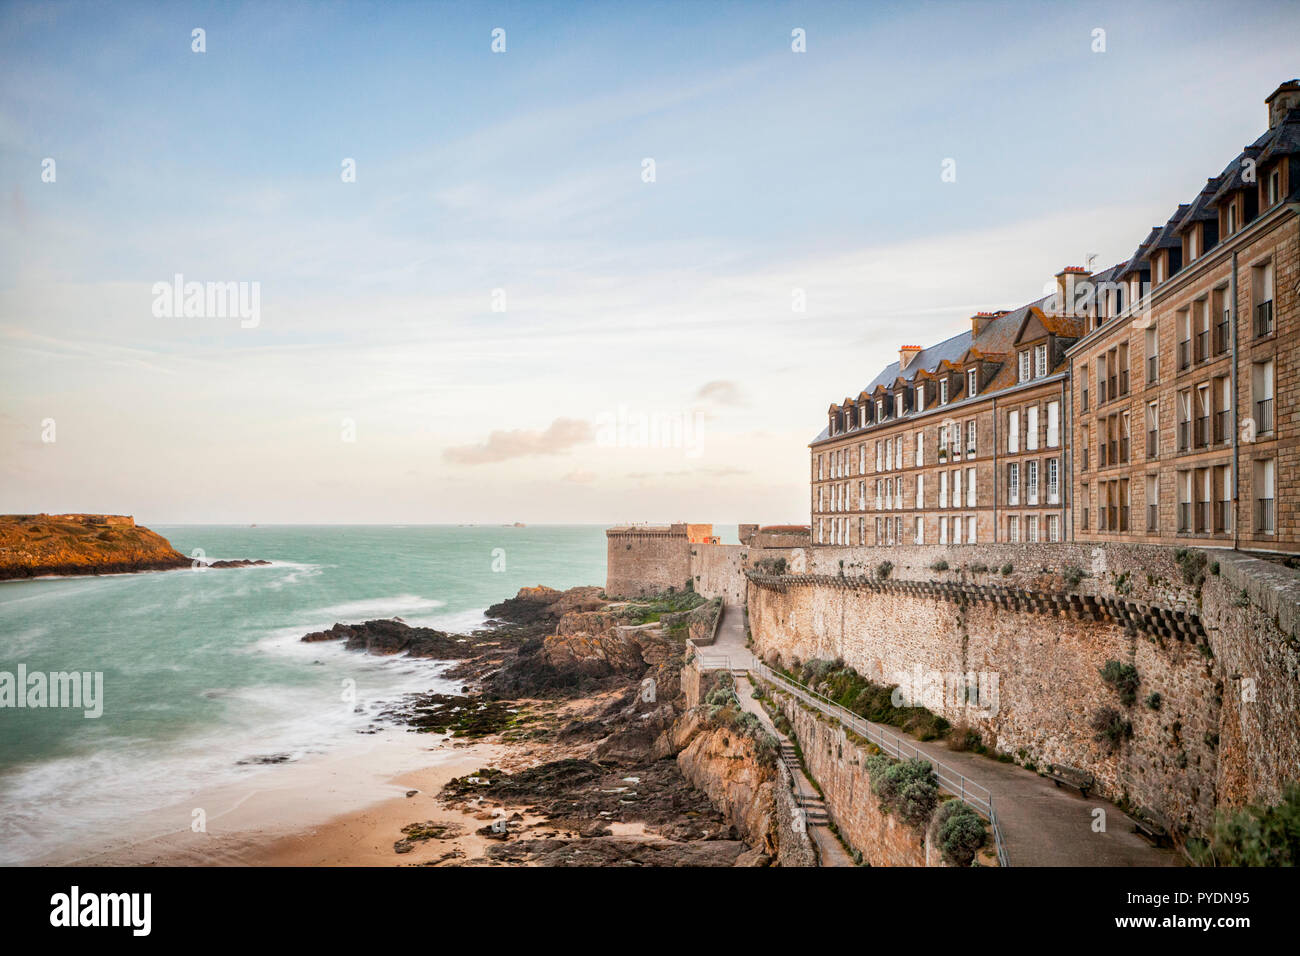 The walled town of Saint-Malo, Britanny, at dawn. Stock Photo